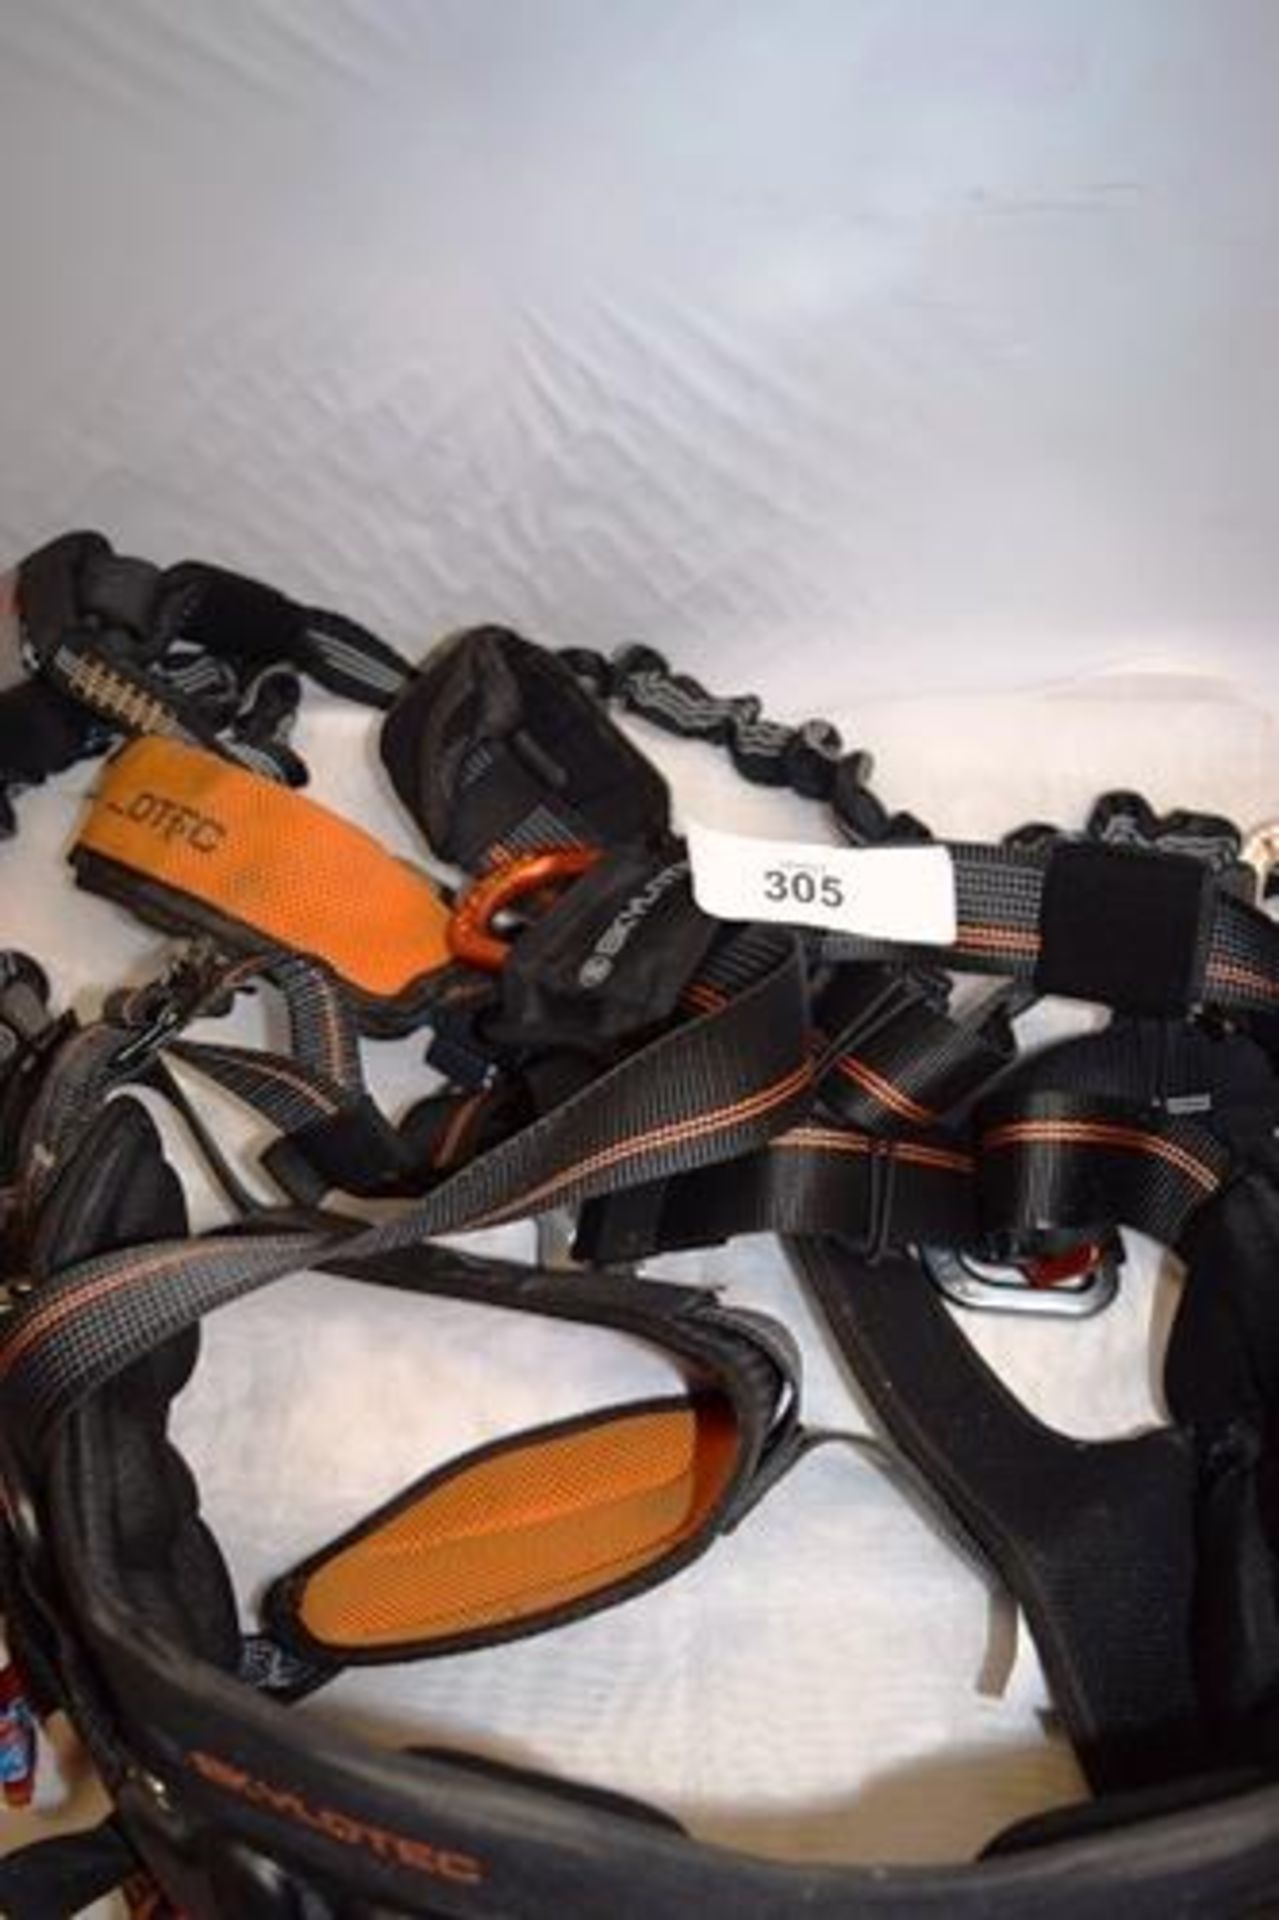 1 x Skylotec full body harness model: Ignite proton wind size M/XXL 91/124cm.- together with 1 x - Image 4 of 4